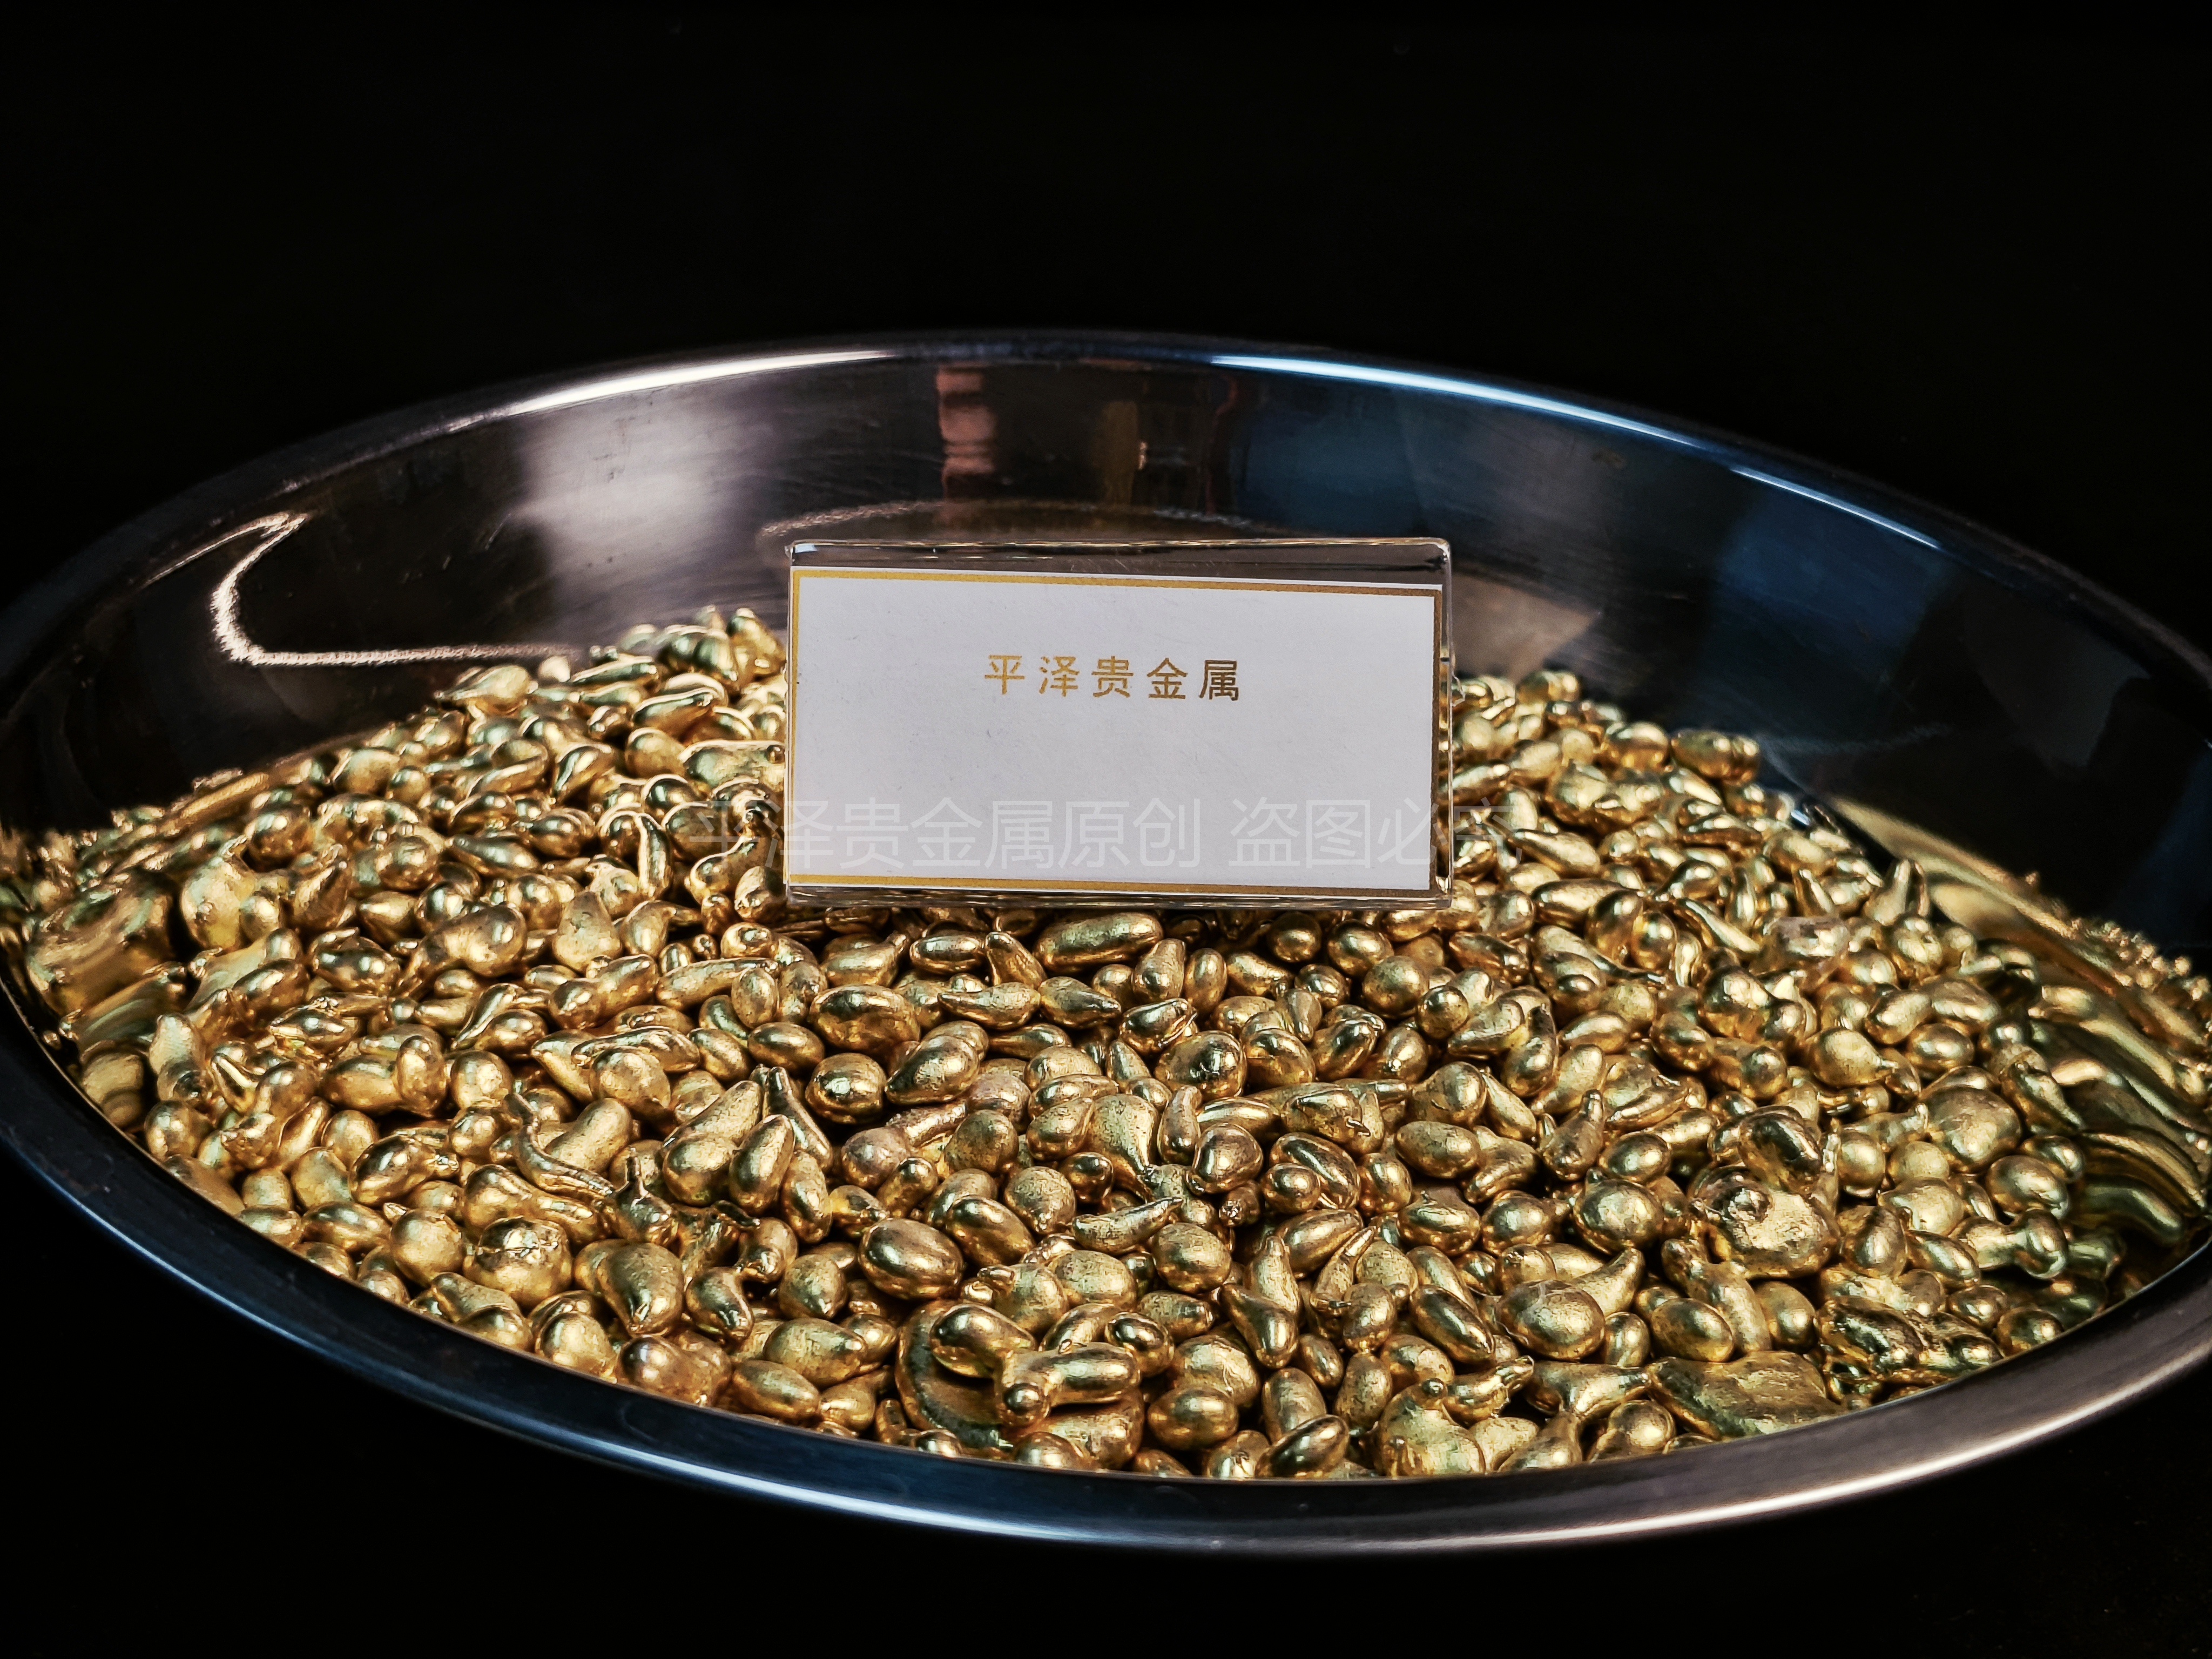 The process of refining gold, the method of purifying gold.